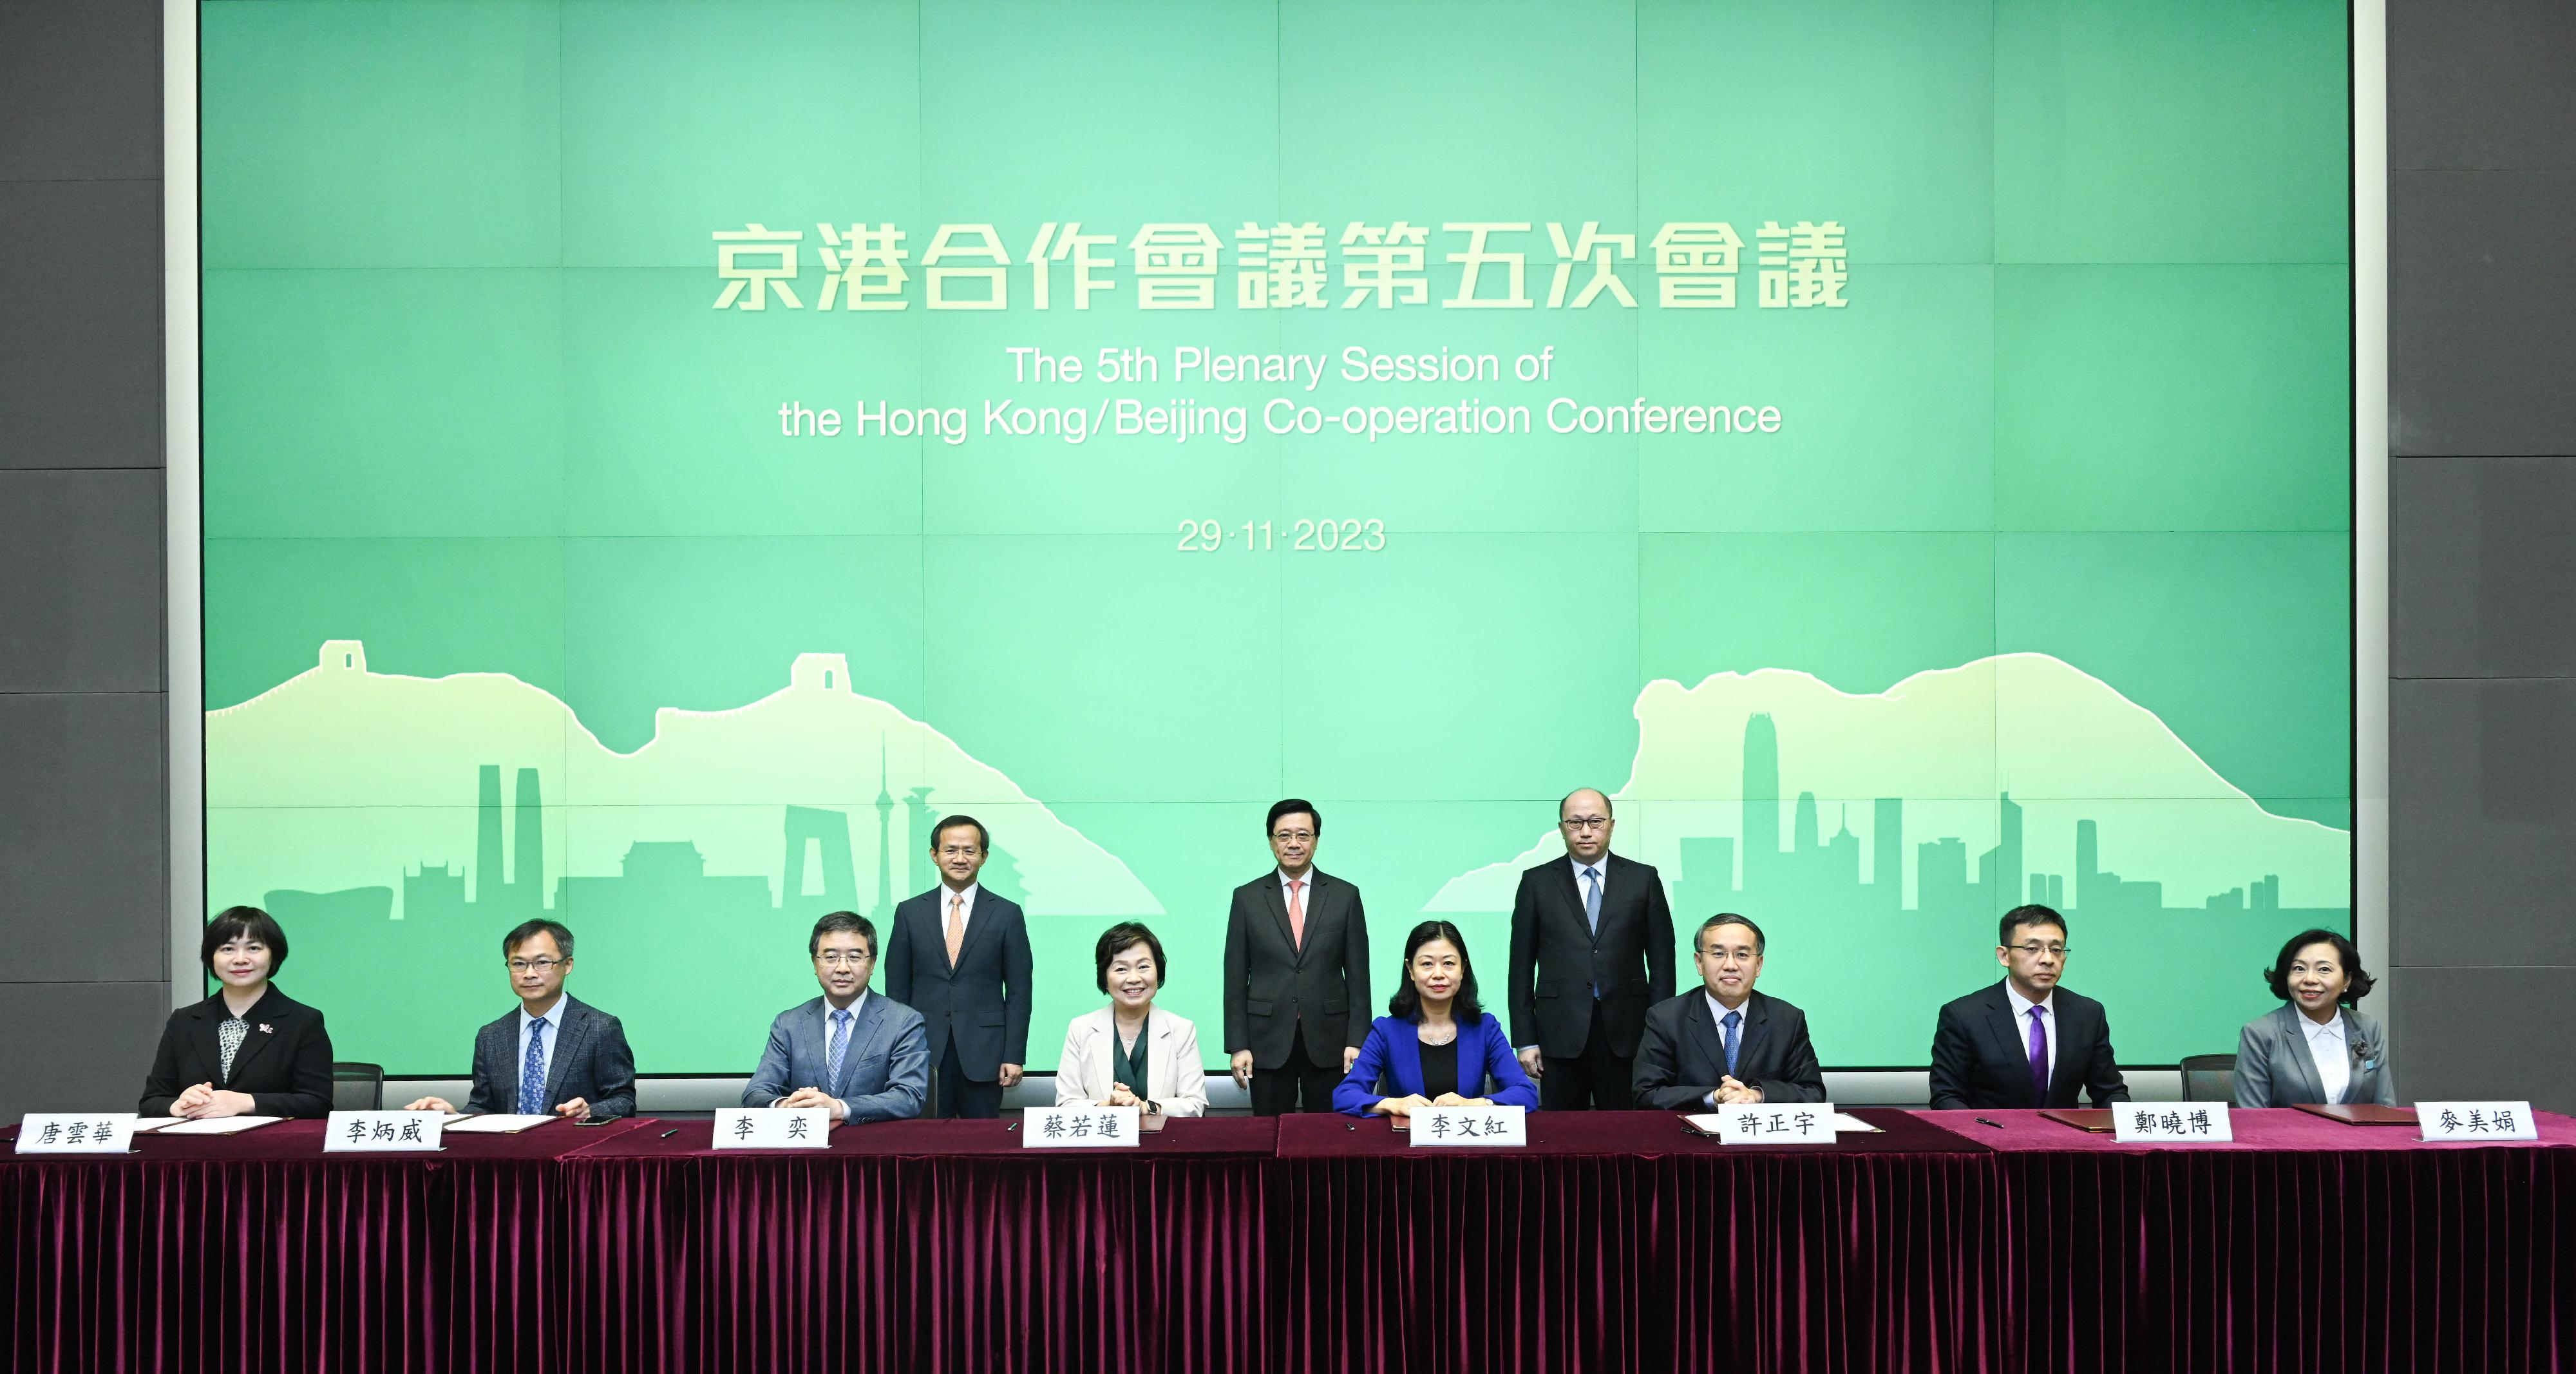 The Chief Executive, Mr John Lee, and the Mayor of Beijing, Mr Yin Yong, leading the delegations of the governments of Hong Kong Special Administrative Region (HKSAR) and Beijing respectively, held the Fifth Plenary Session of the Hong Kong/Beijing Co-operation Conference in Hong Kong today (November 29). Photo shows Mr Lee (back row, centre); Mr Yin (back row, left); and Deputy Director of the Hong Kong and Macao Affairs Office of the State Council, Director of the Liaison Office of the Central People's Government in the HKSAR, Mr Zheng Yanxiong (back row, right), witnessing the signing of the four co-operation agreements by government departments of the two places.